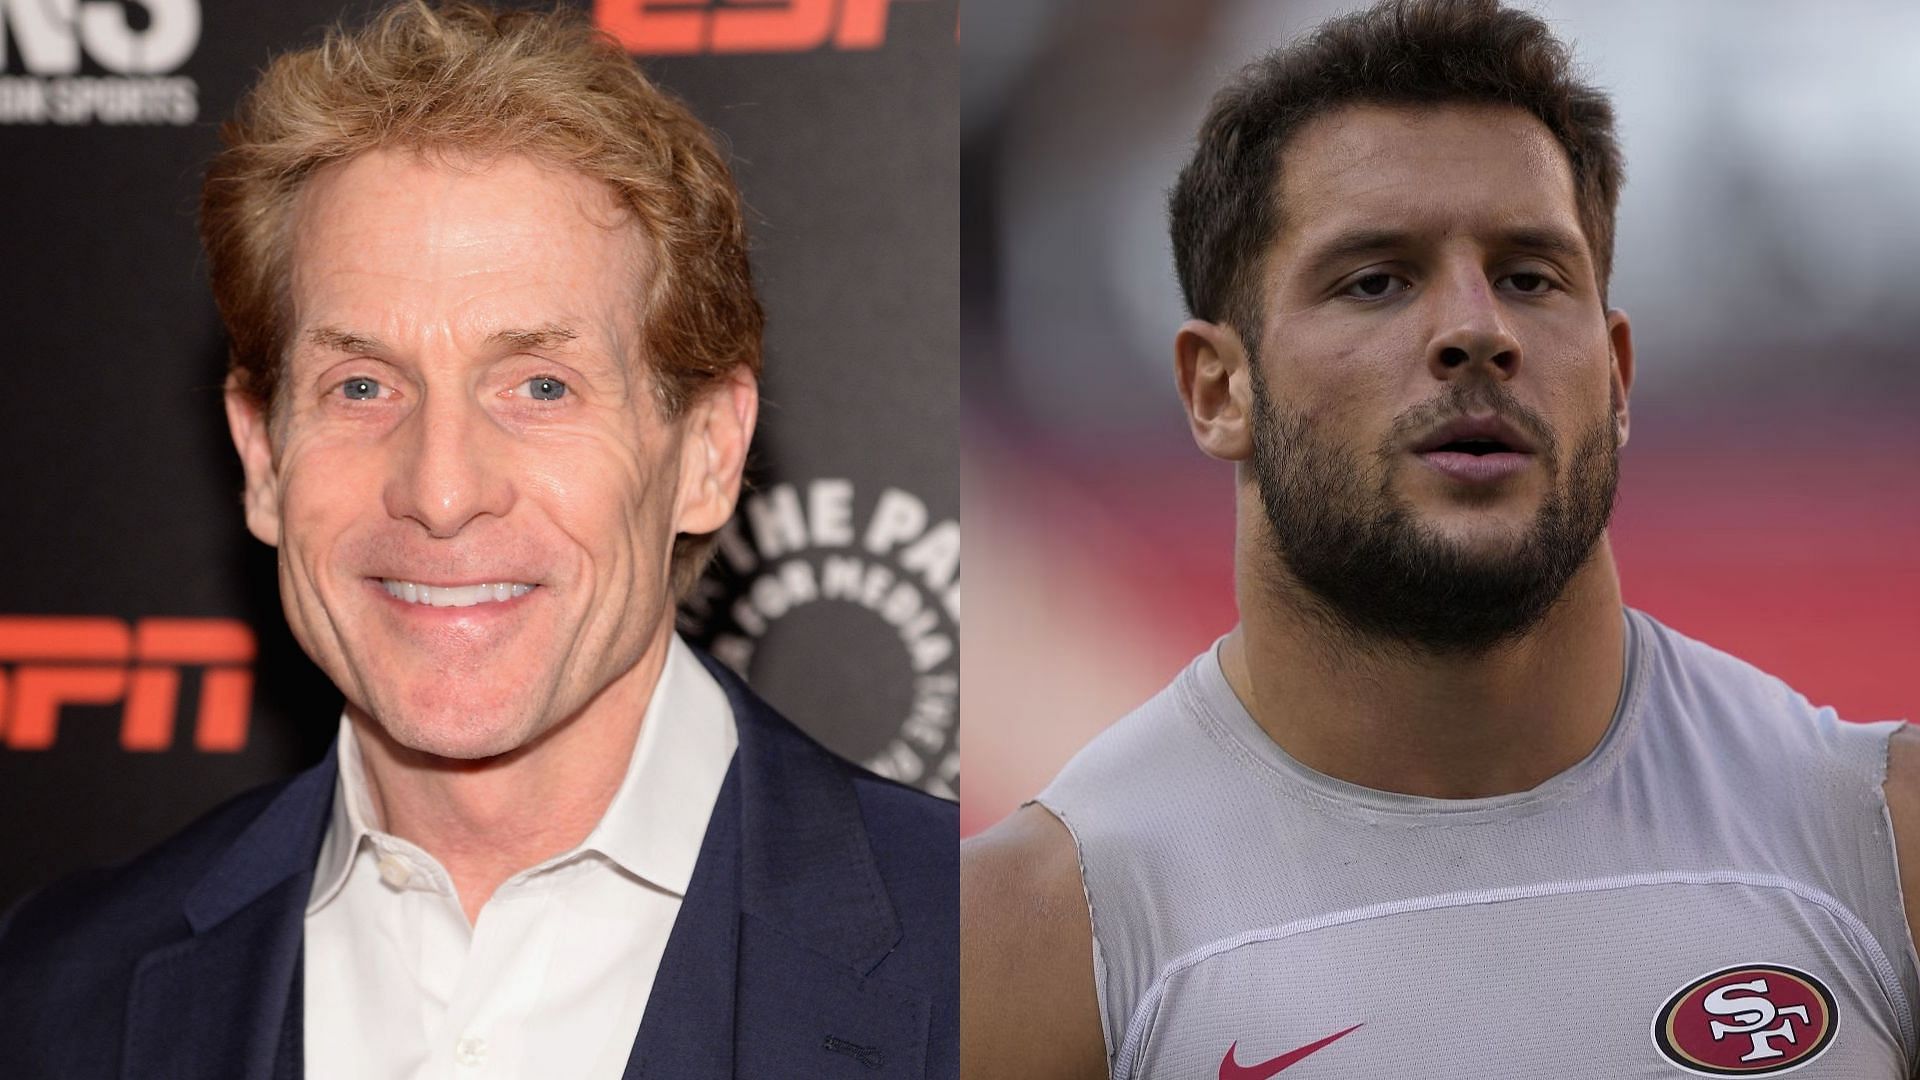 Sports media personality Skip Bayless and San Francisco 49ers defensive end Nick Bosa 